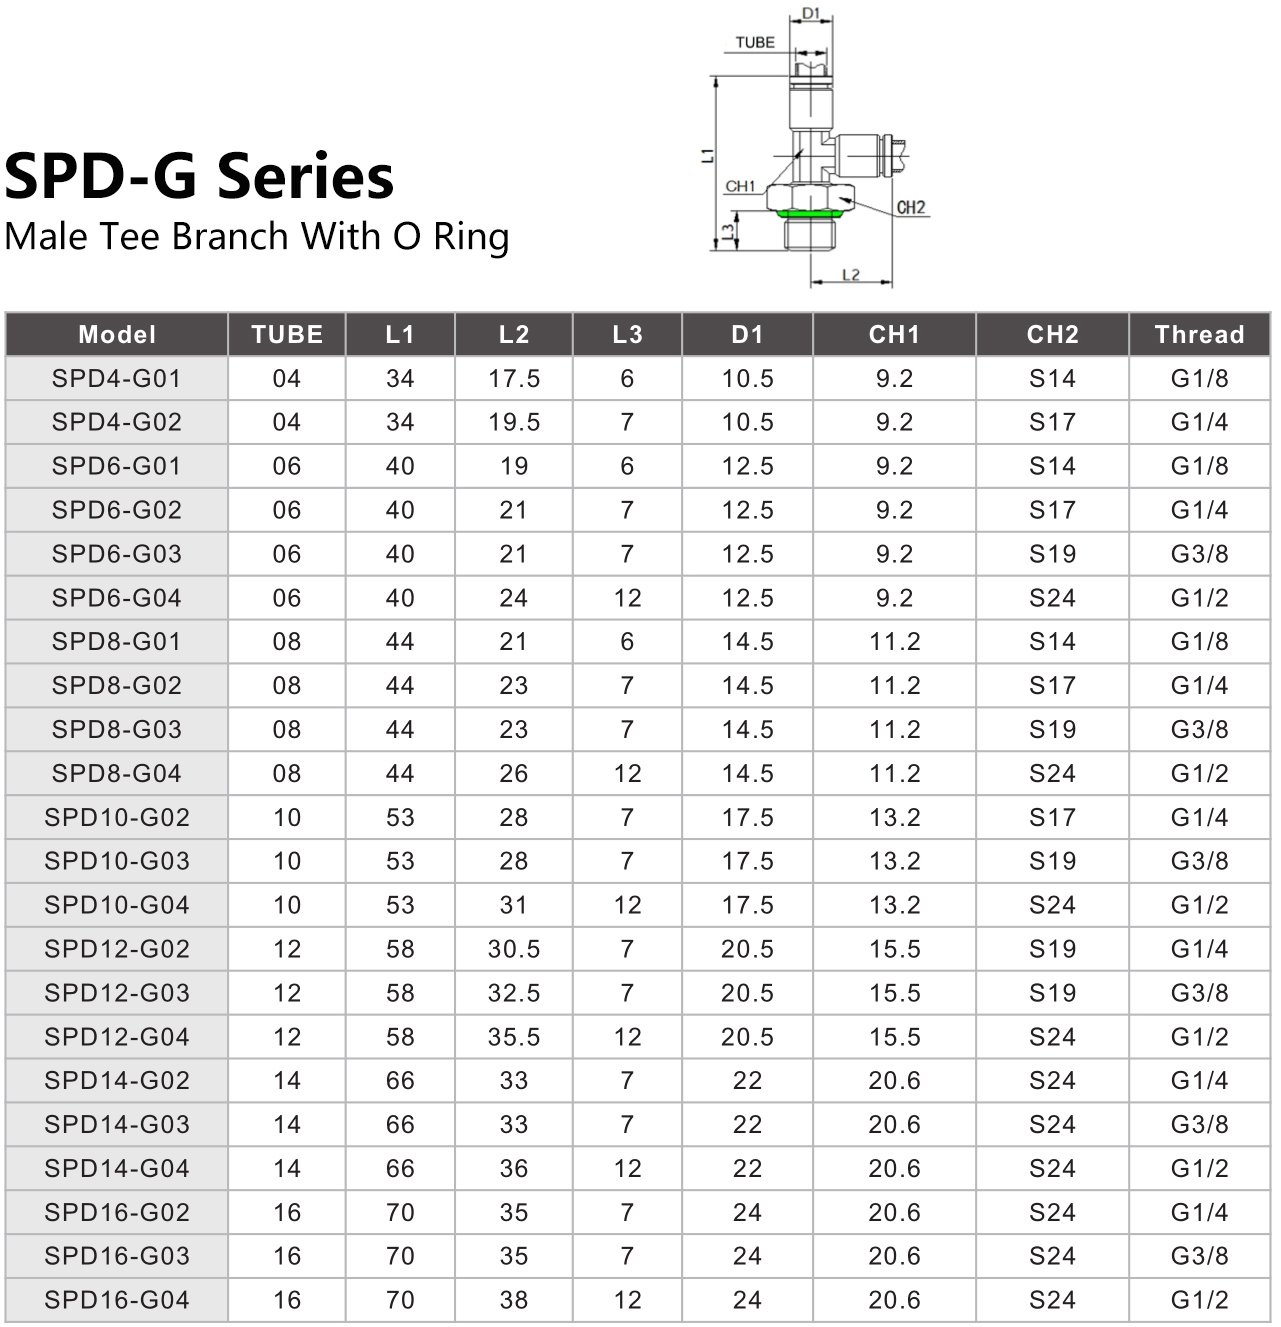 SPD-G Series Male Tee Branch With O Ring